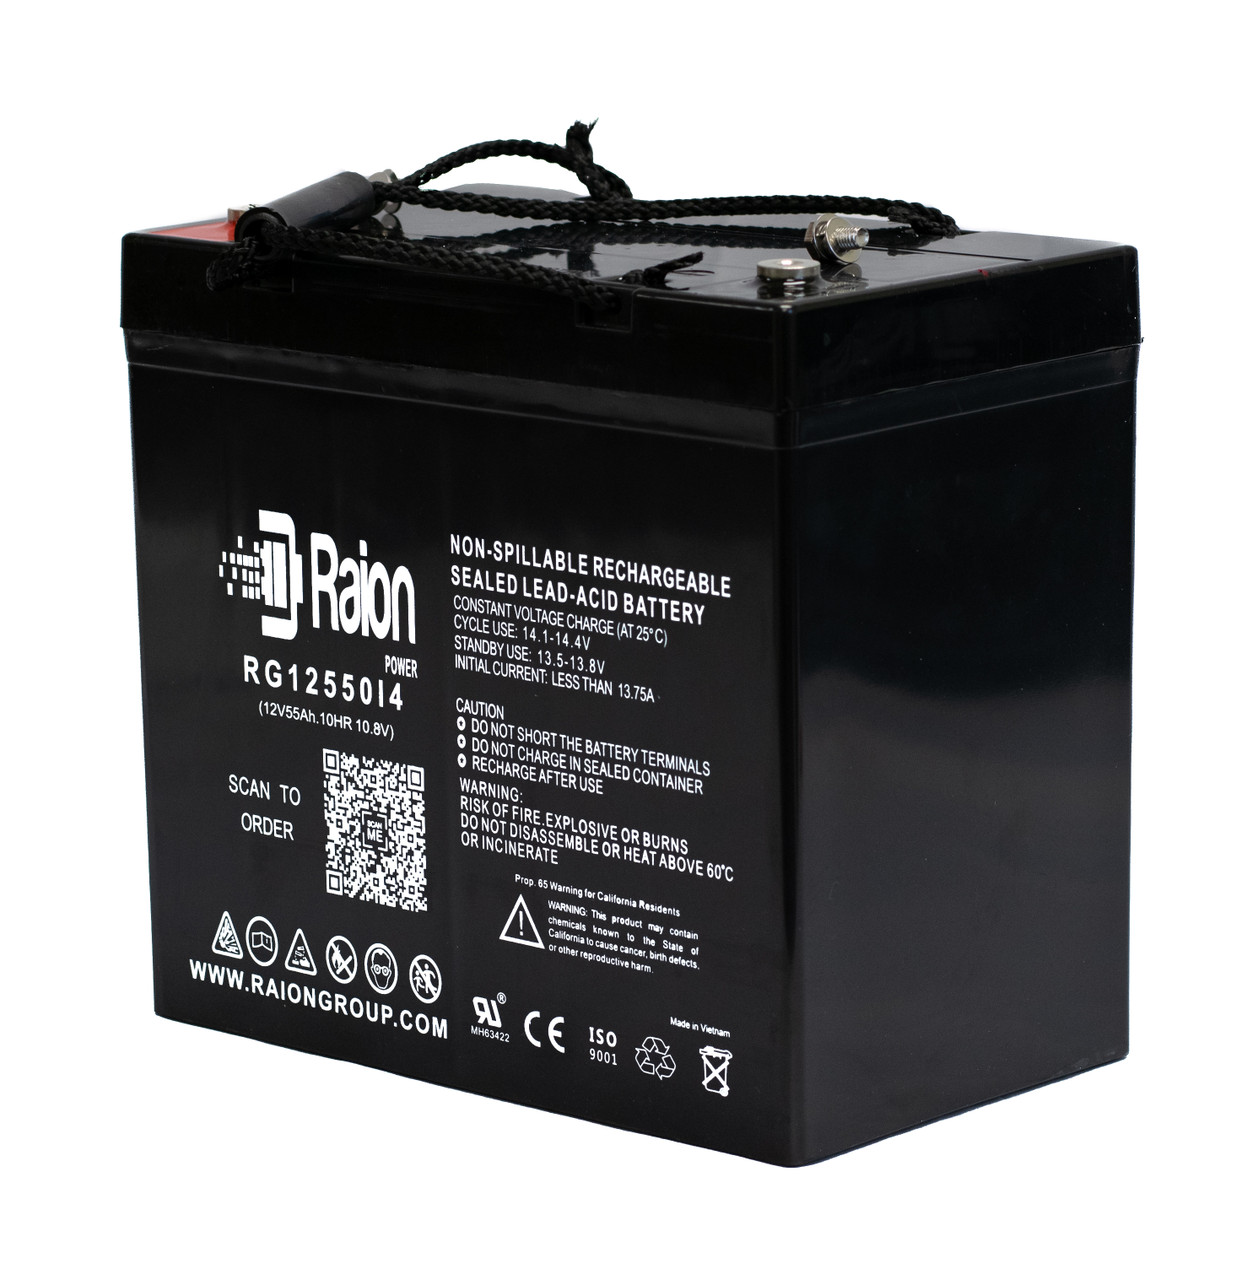 Raion Power 12V 55Ah 22NF Mobility Scooter Battery Replacement for Pride Jet 10